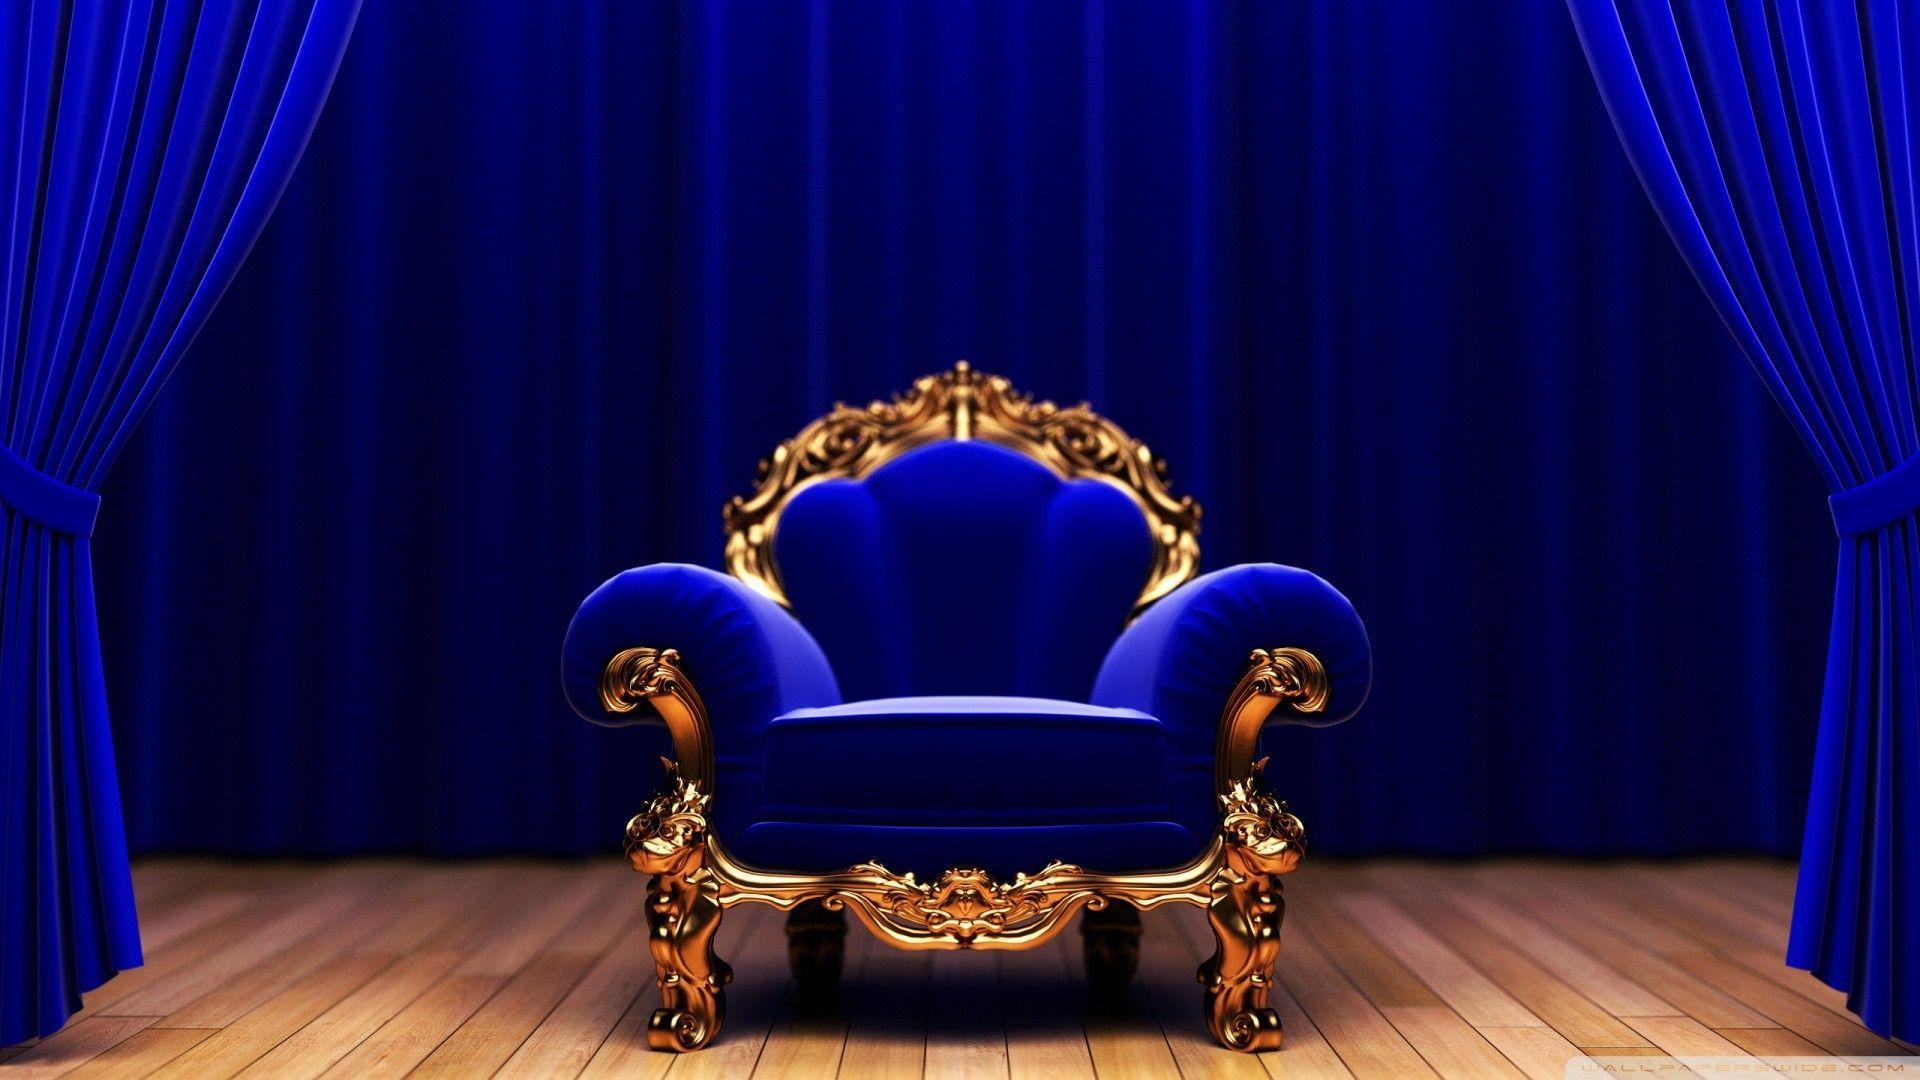 King Throne Wallpapers - Top Free King Throne Backgrounds - WallpaperAccess